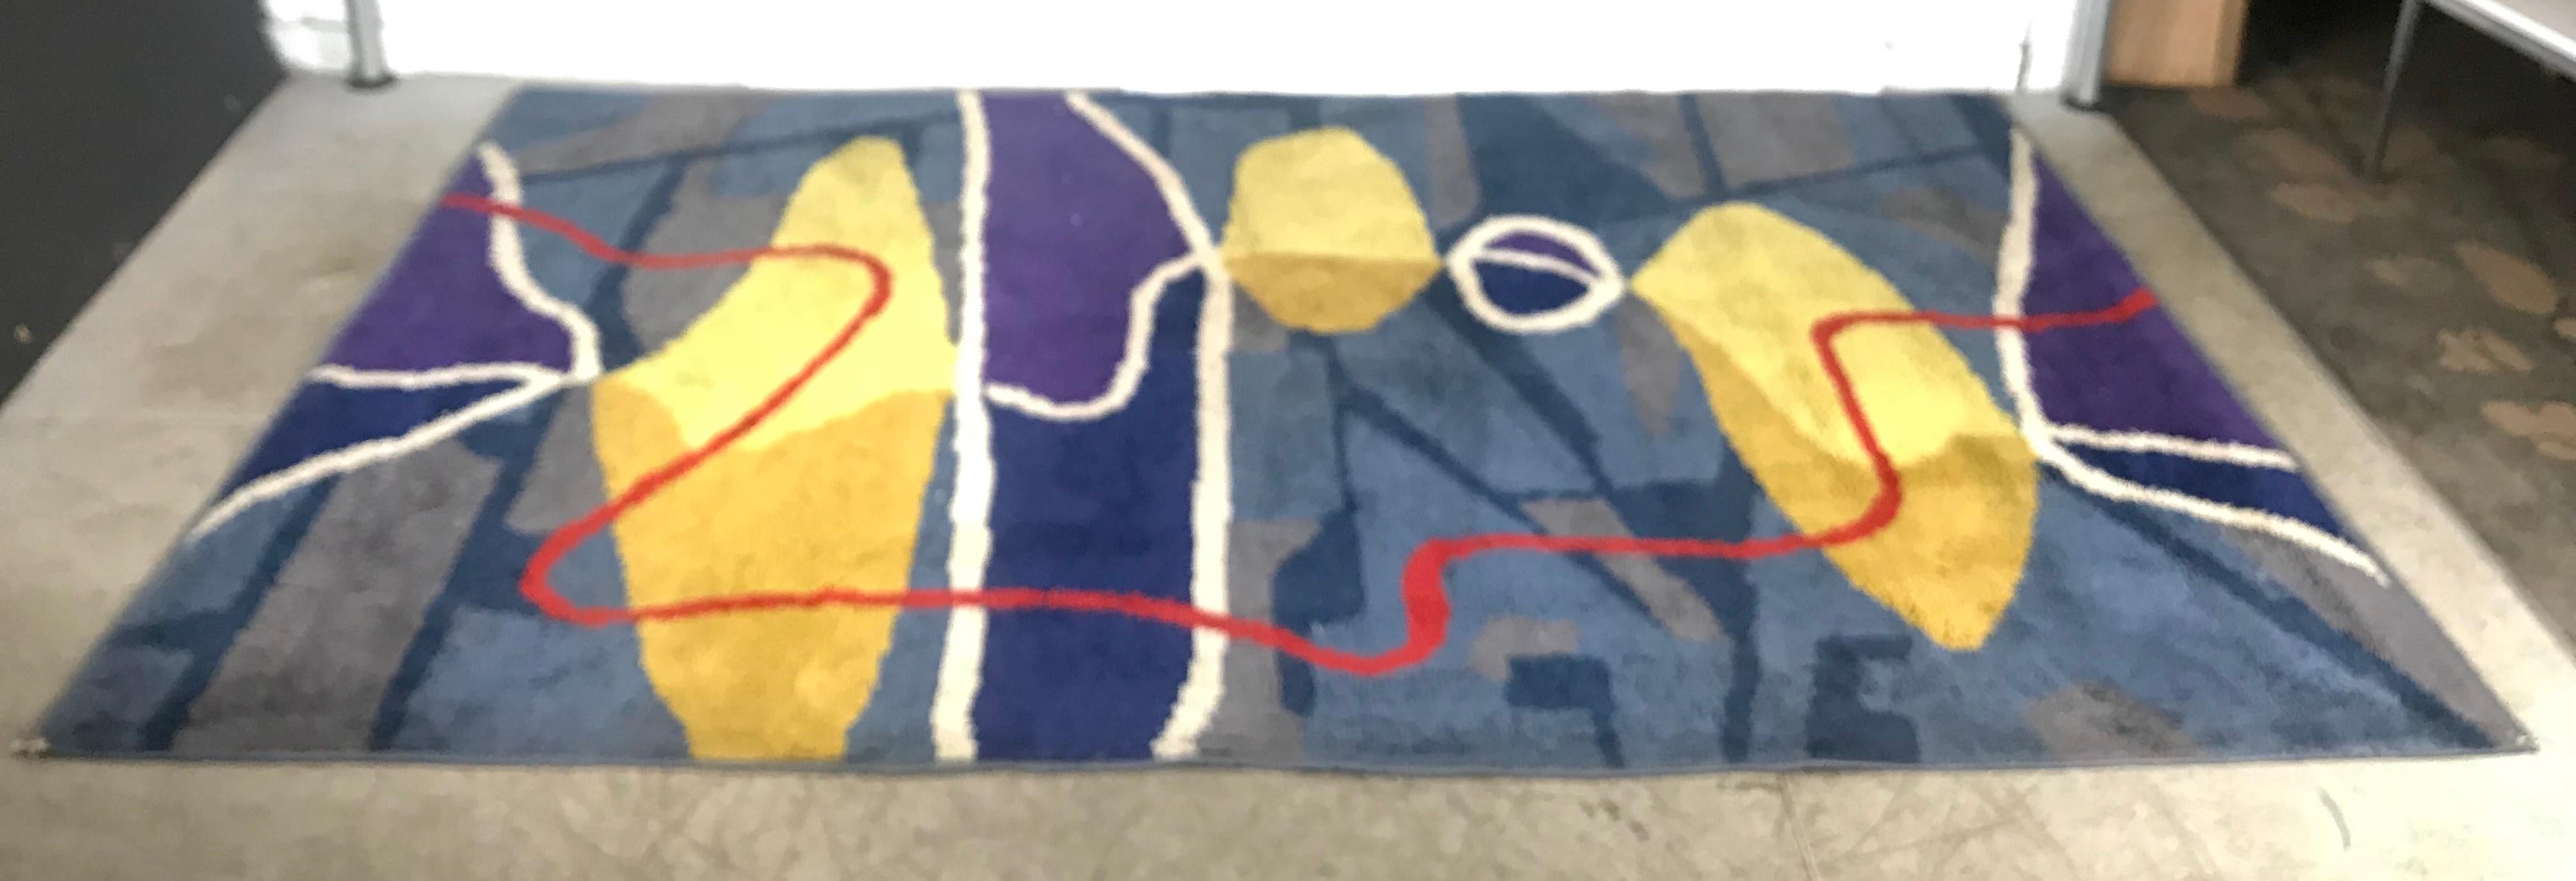 Rare abstract modernist Moroccan wool rug, Artisanat. original label. Amazing colors and design, some low spots to pile, also minor wear, white knot showing. Overall nice original condition. Just sent out to be professionally cleaned.